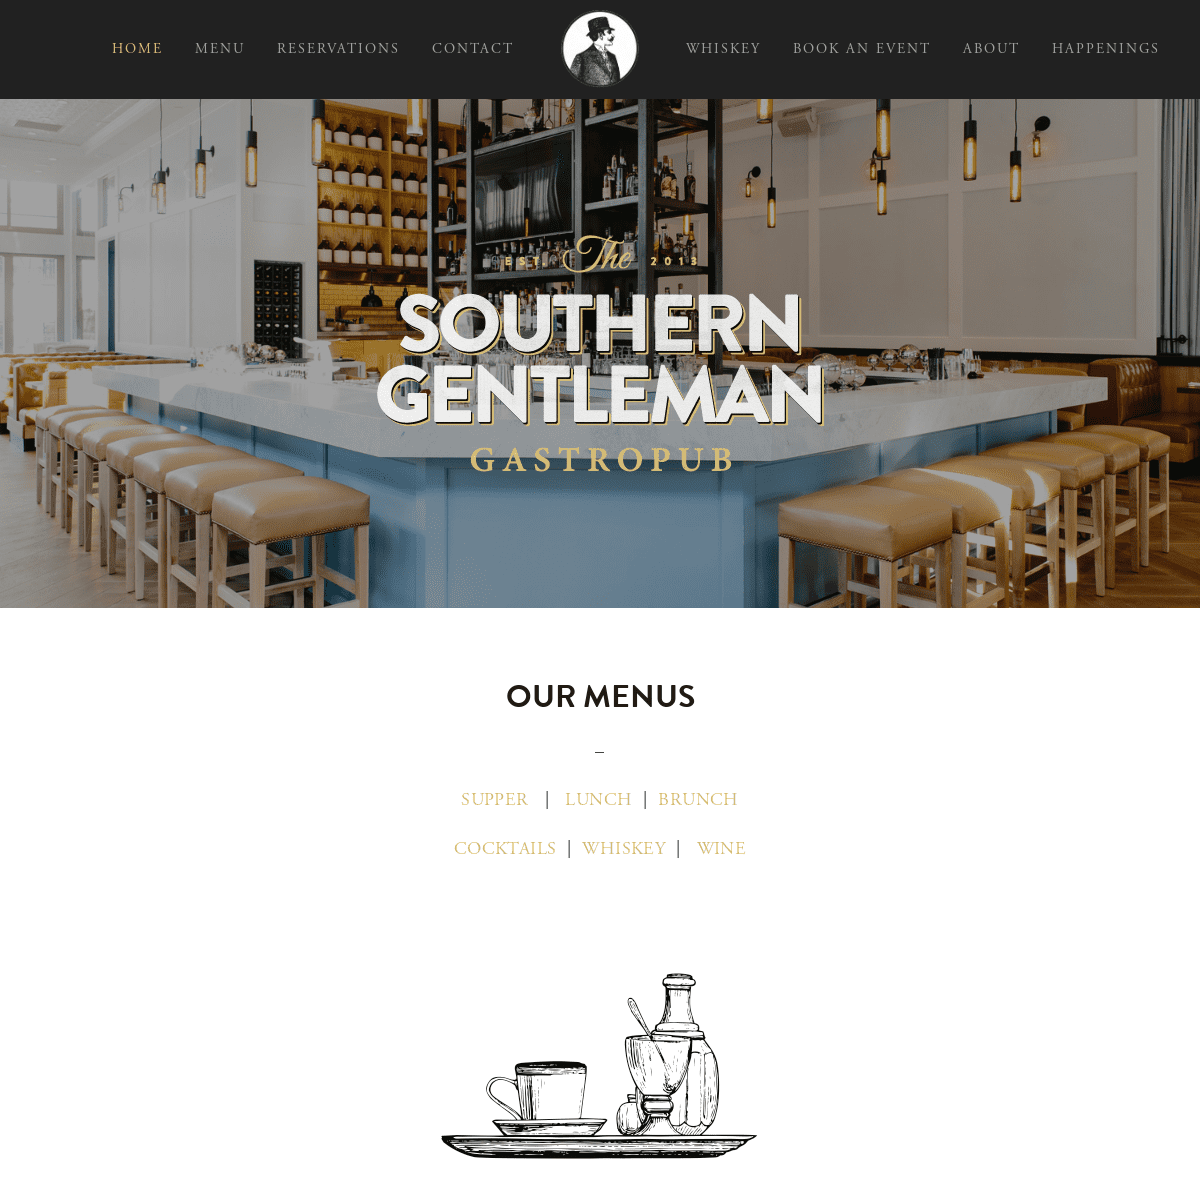 The Southern Gentleman